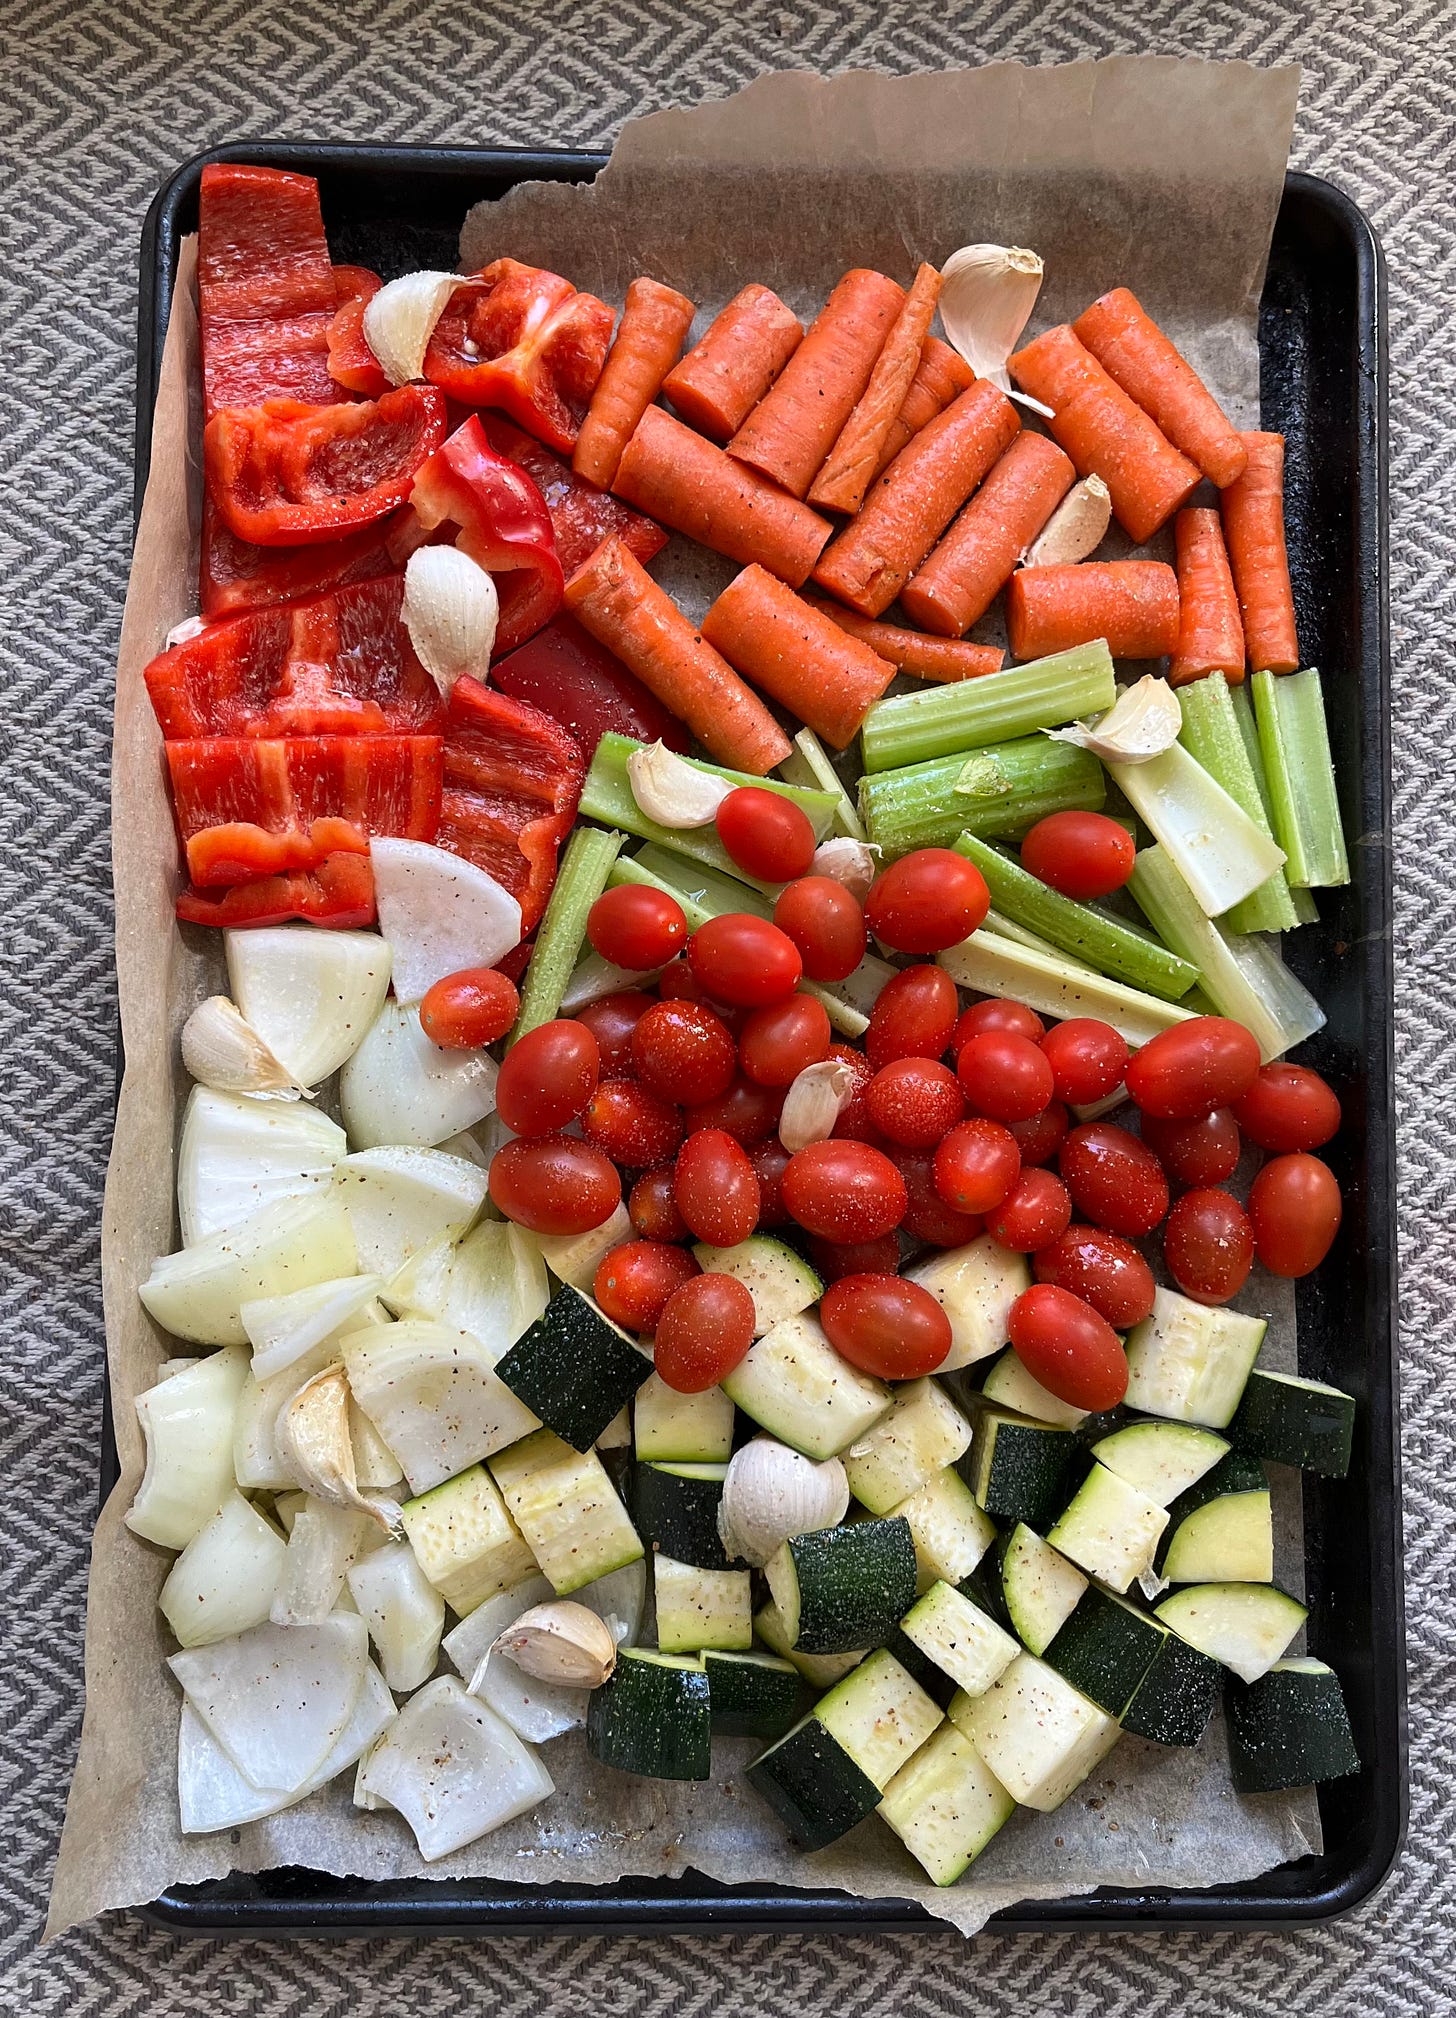 Tray of vegetables.